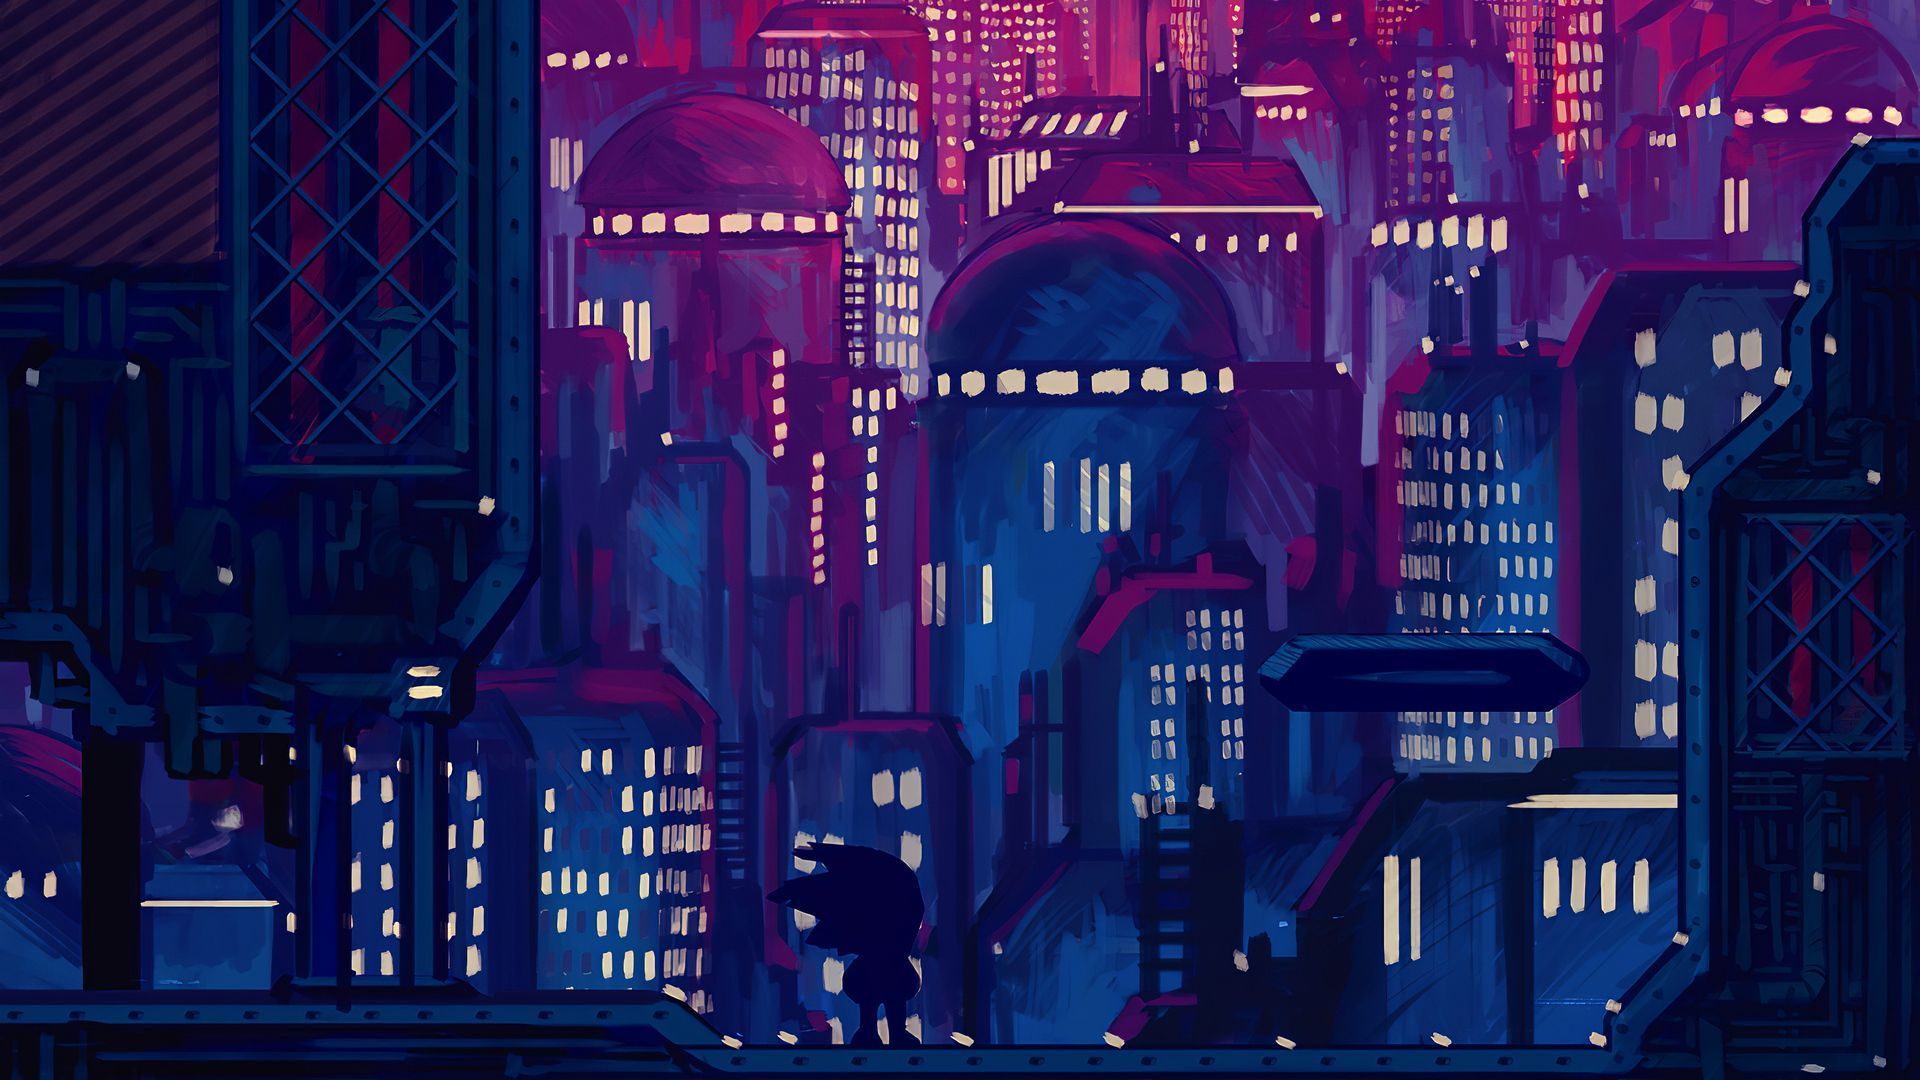 The city at night wallpaper 1920x1080 for mobile - Sonic